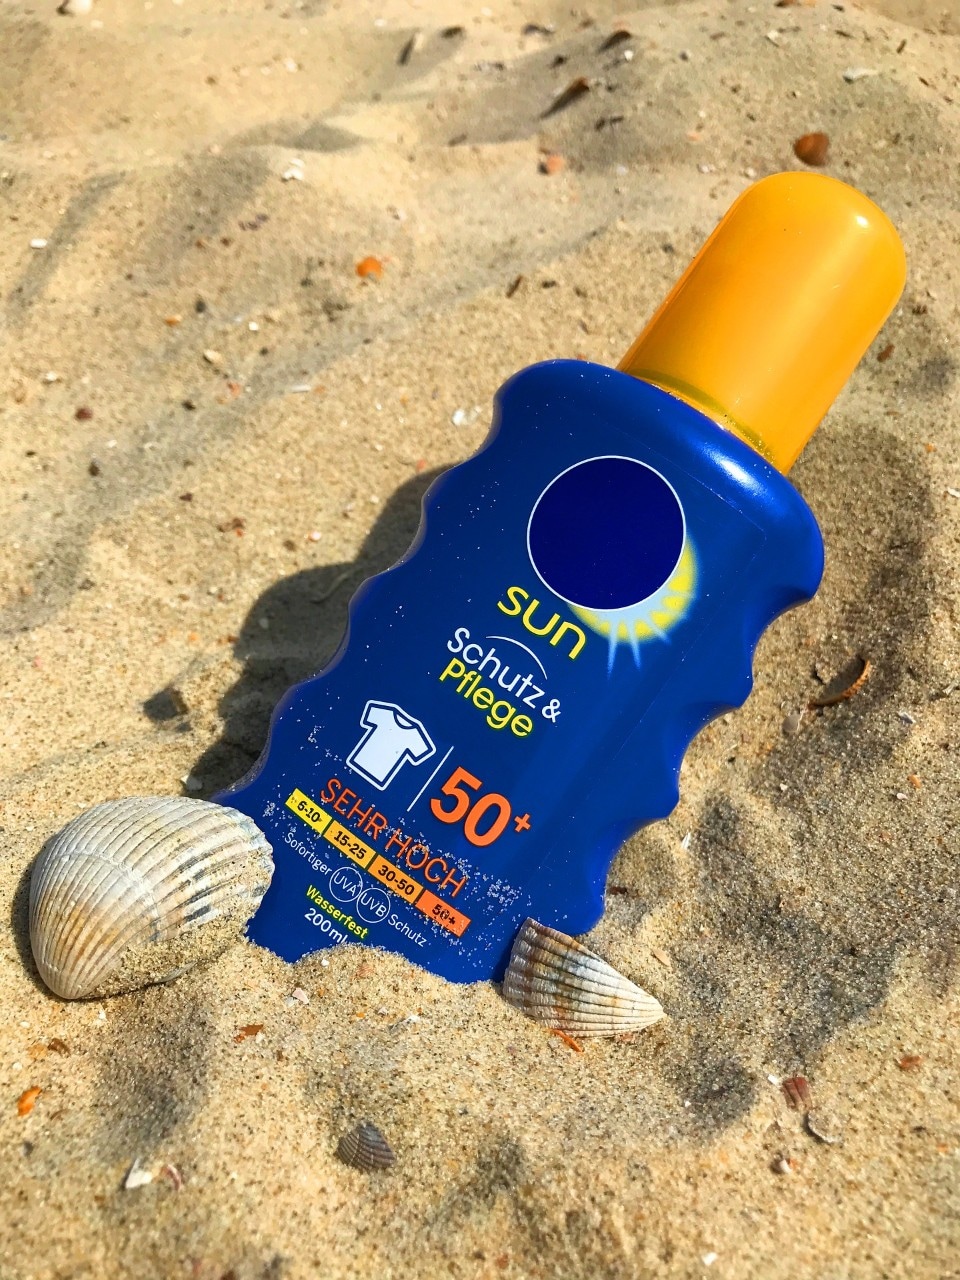 Sunblock in the sand with 'SPF 15' and 'UVA and UVB protection' on the label.